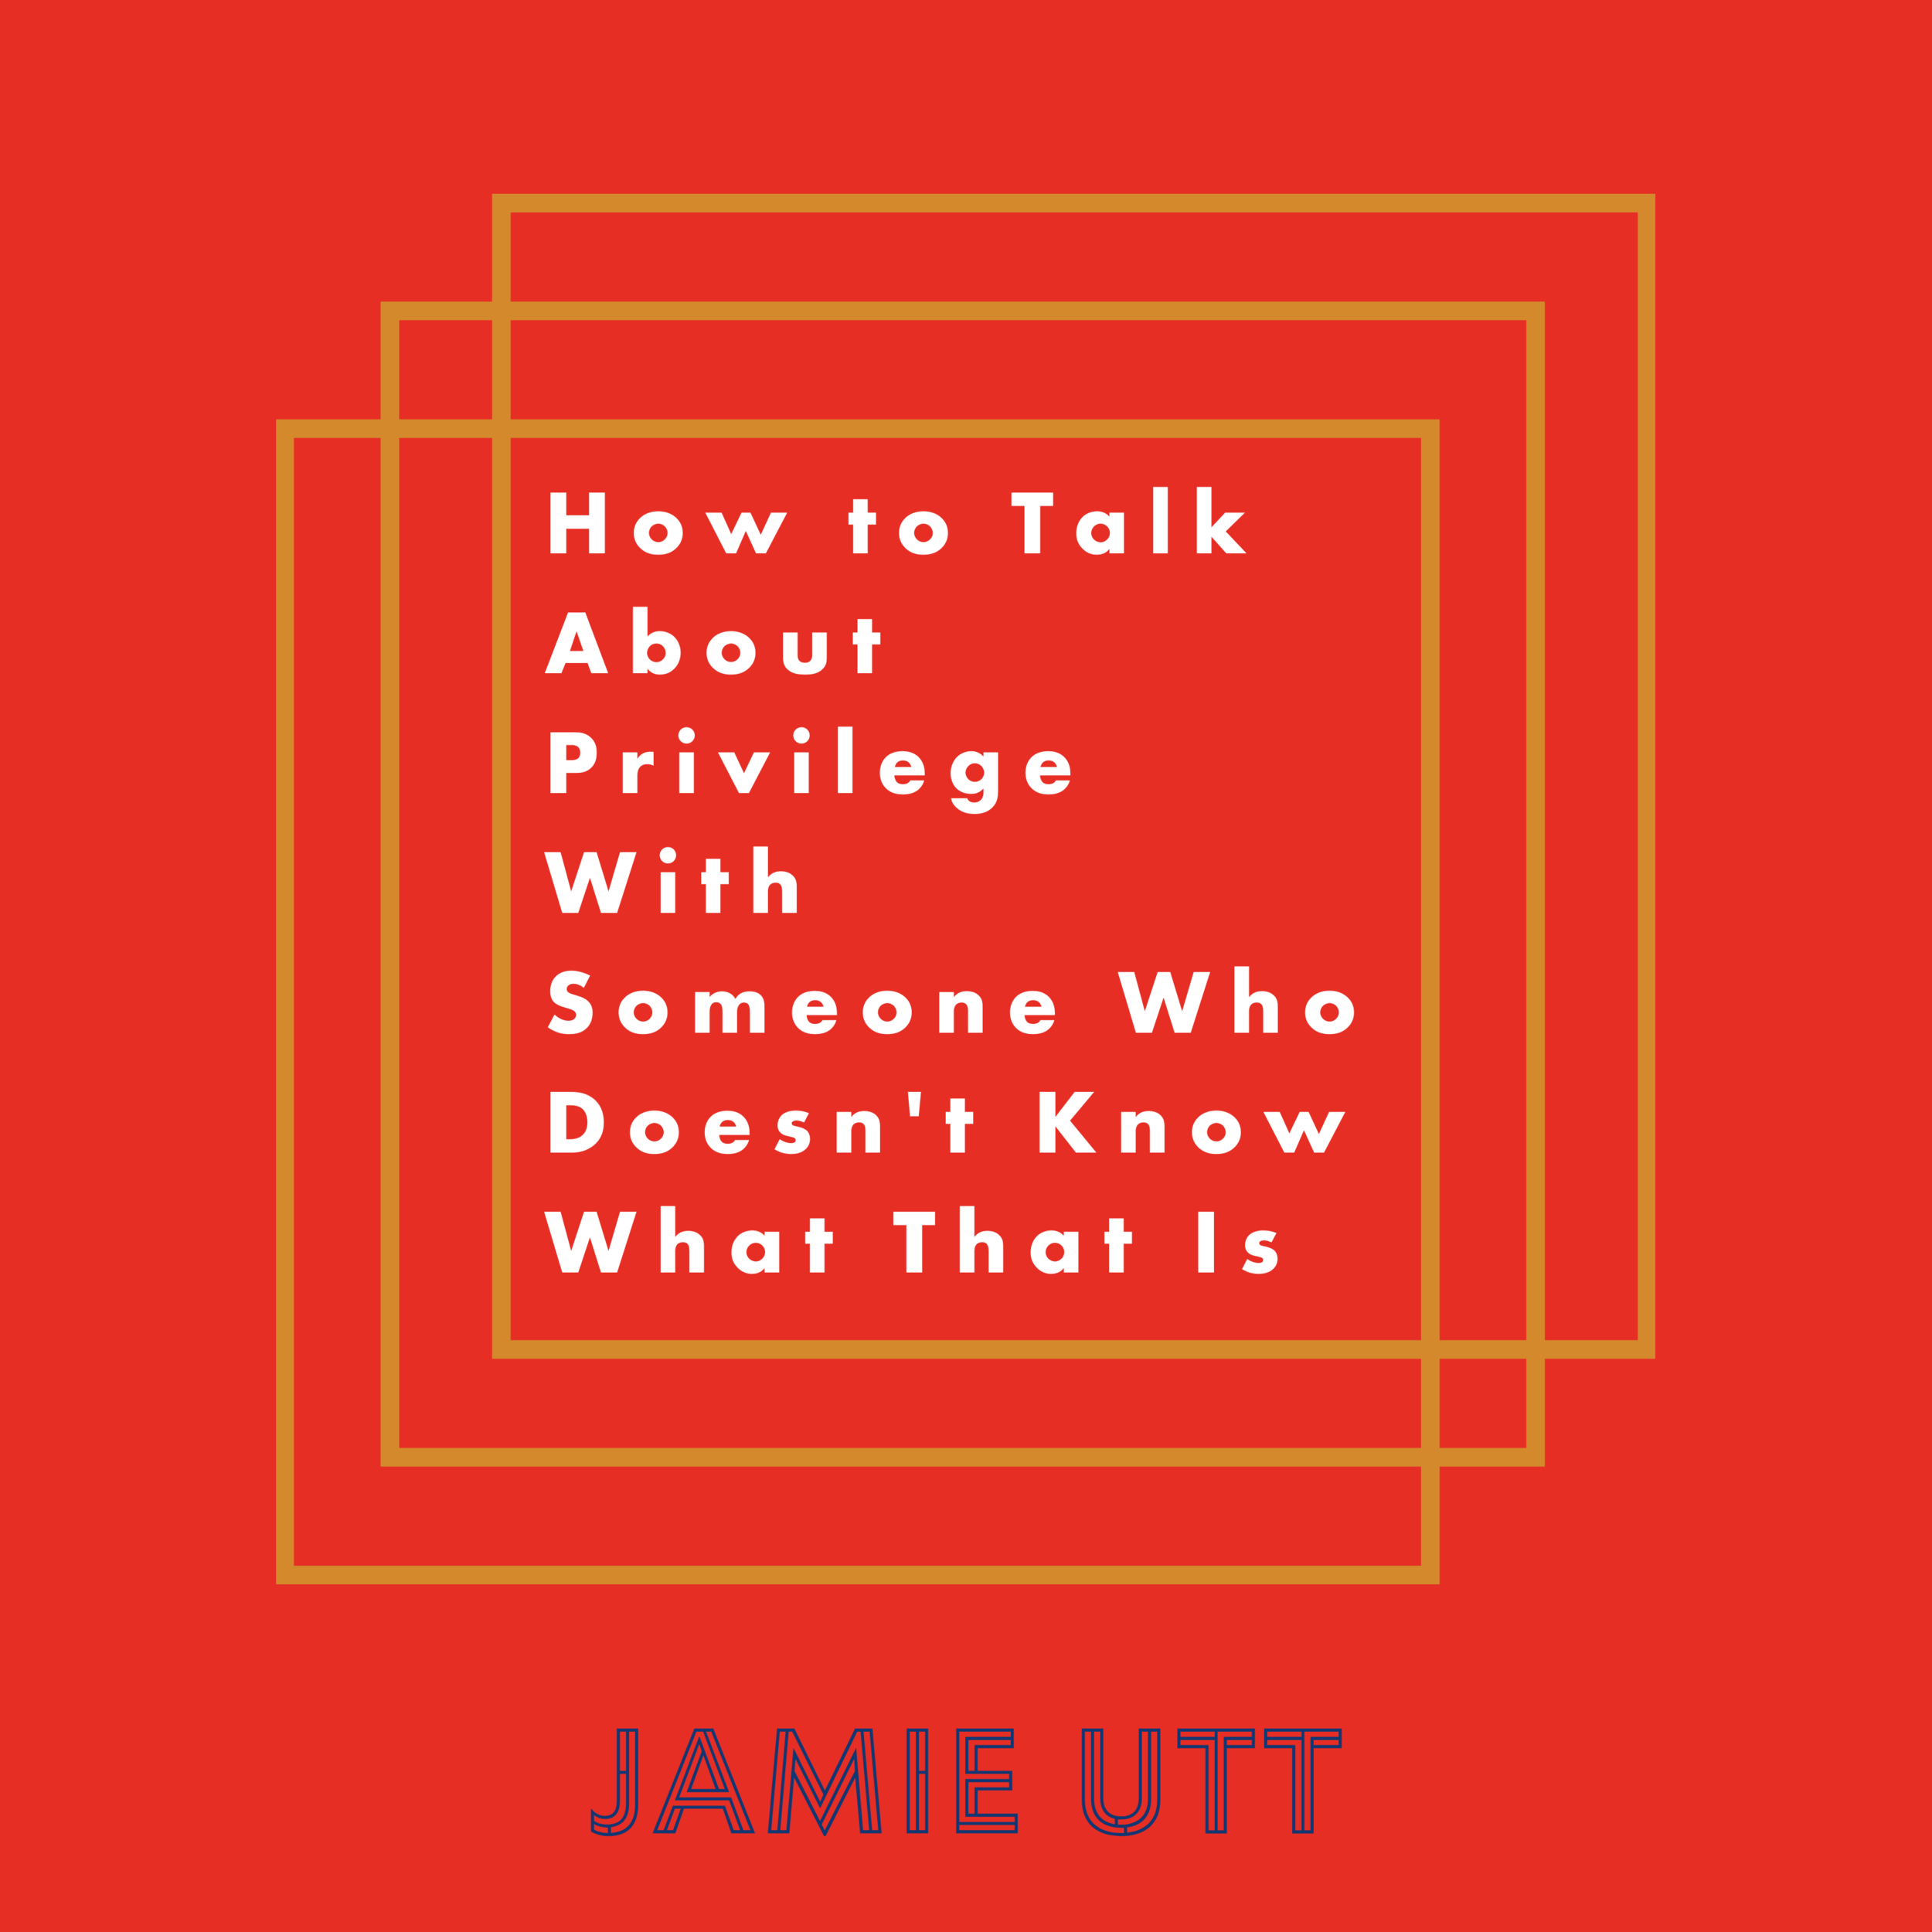 How To Talk About Privilege With Someone Who Doesn't Know What That Is, Jamie Utt